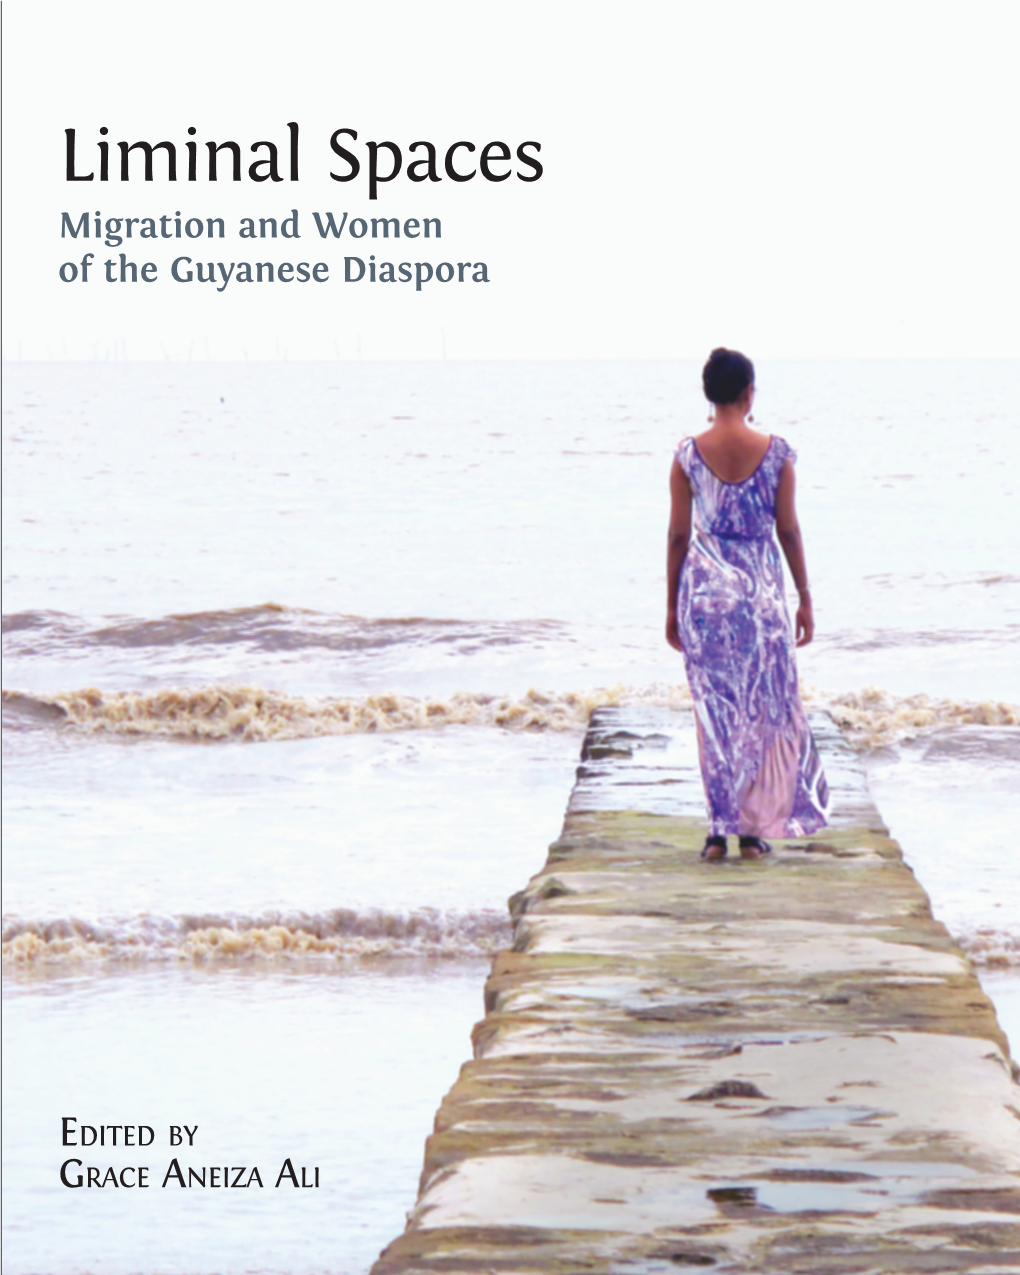 Liminal Spaces Liminal Spaces Migration and Women of the Guyanese Diaspora